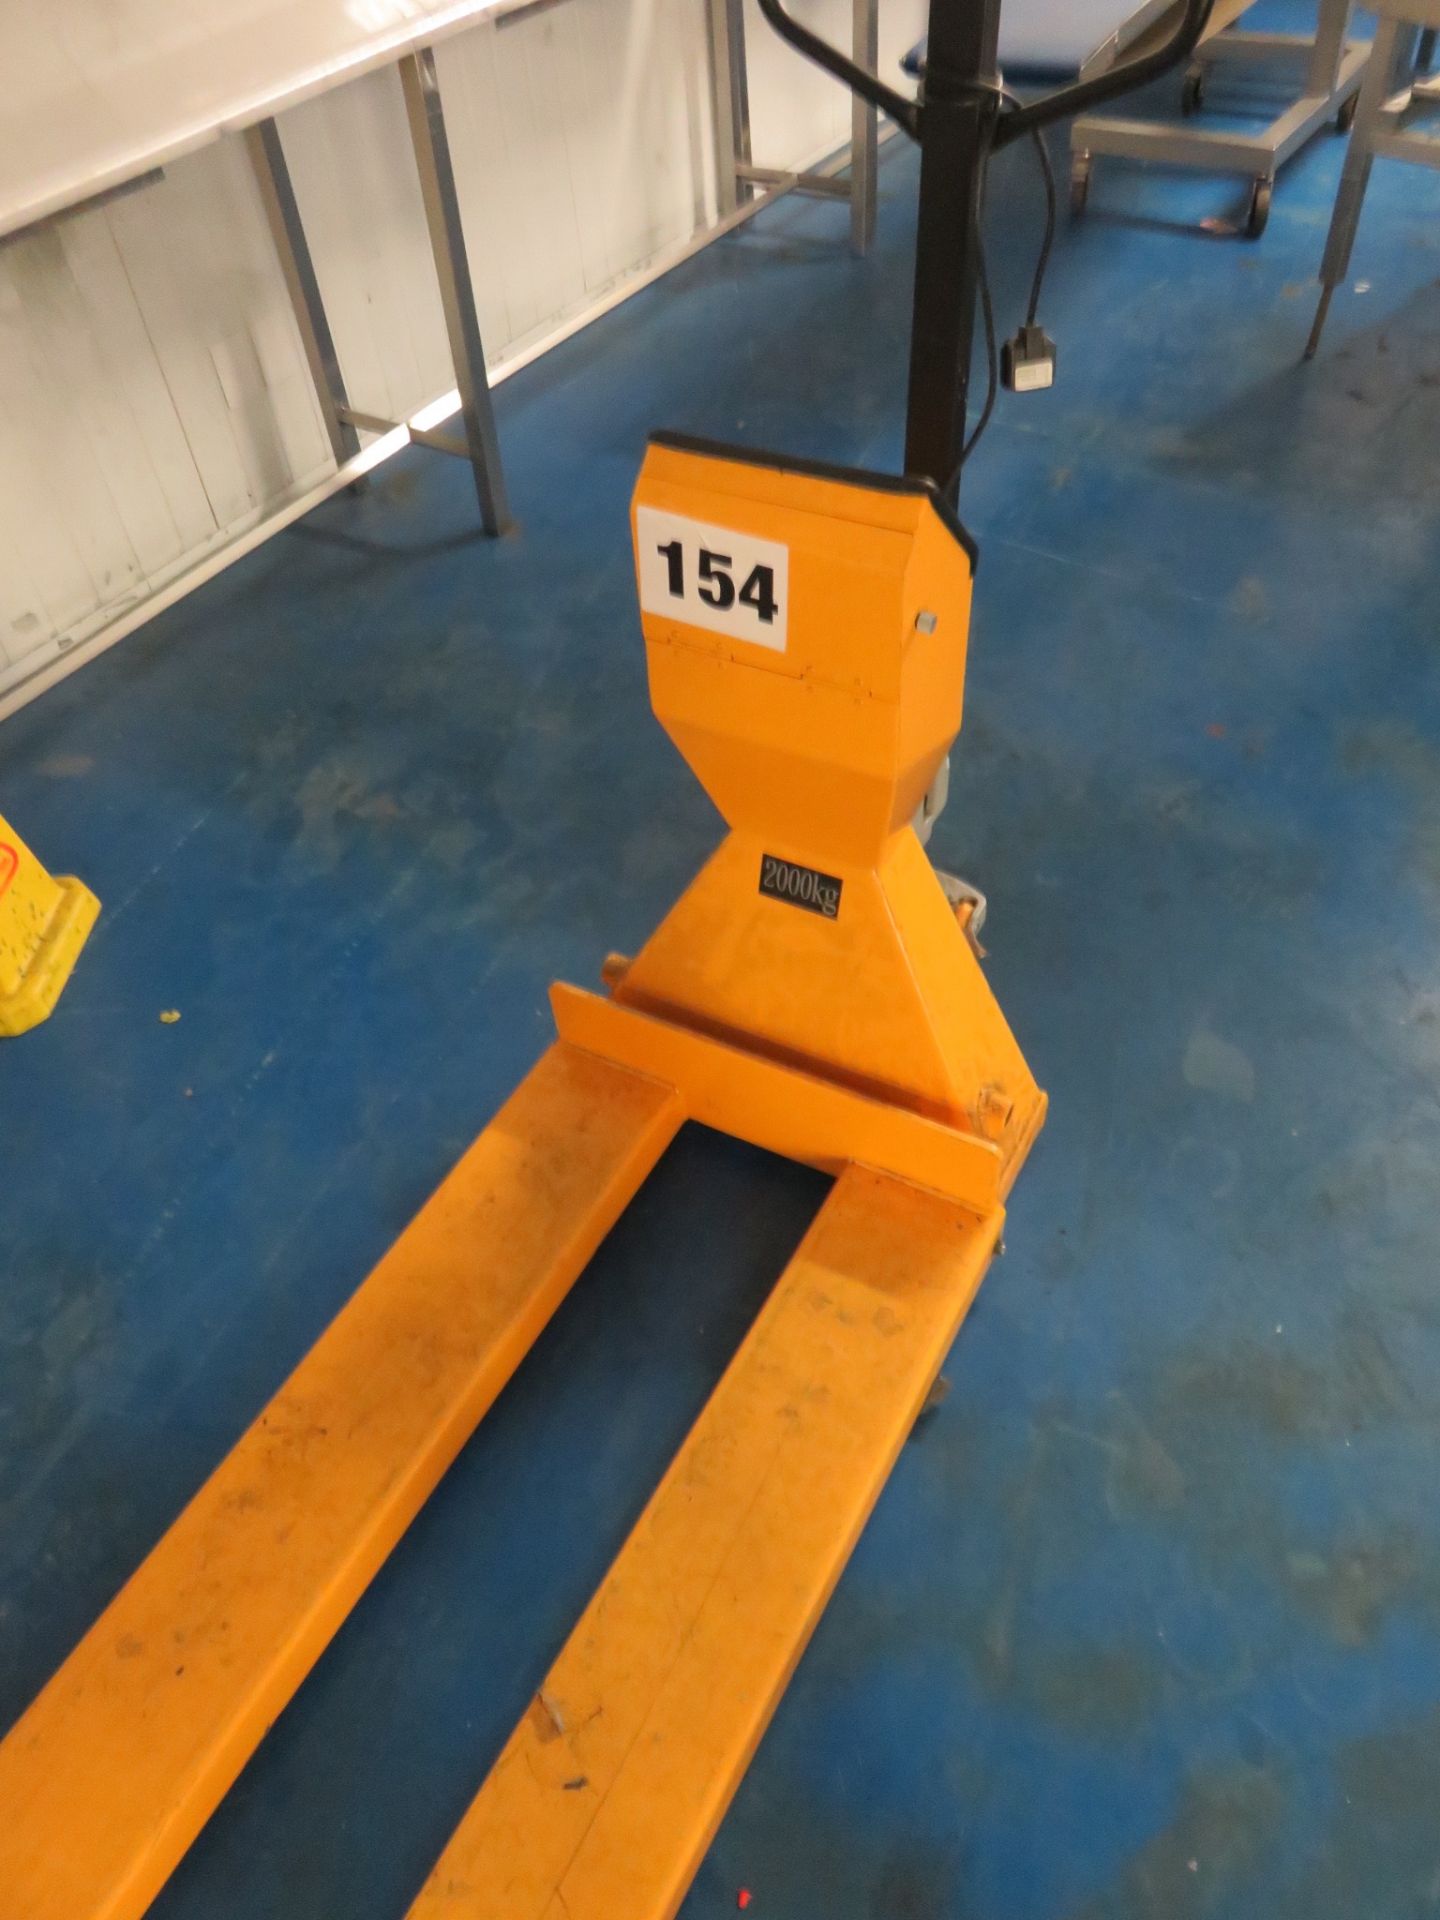 1 x Pallet Truck weighing scale electric, 2,000 KG. LO £10